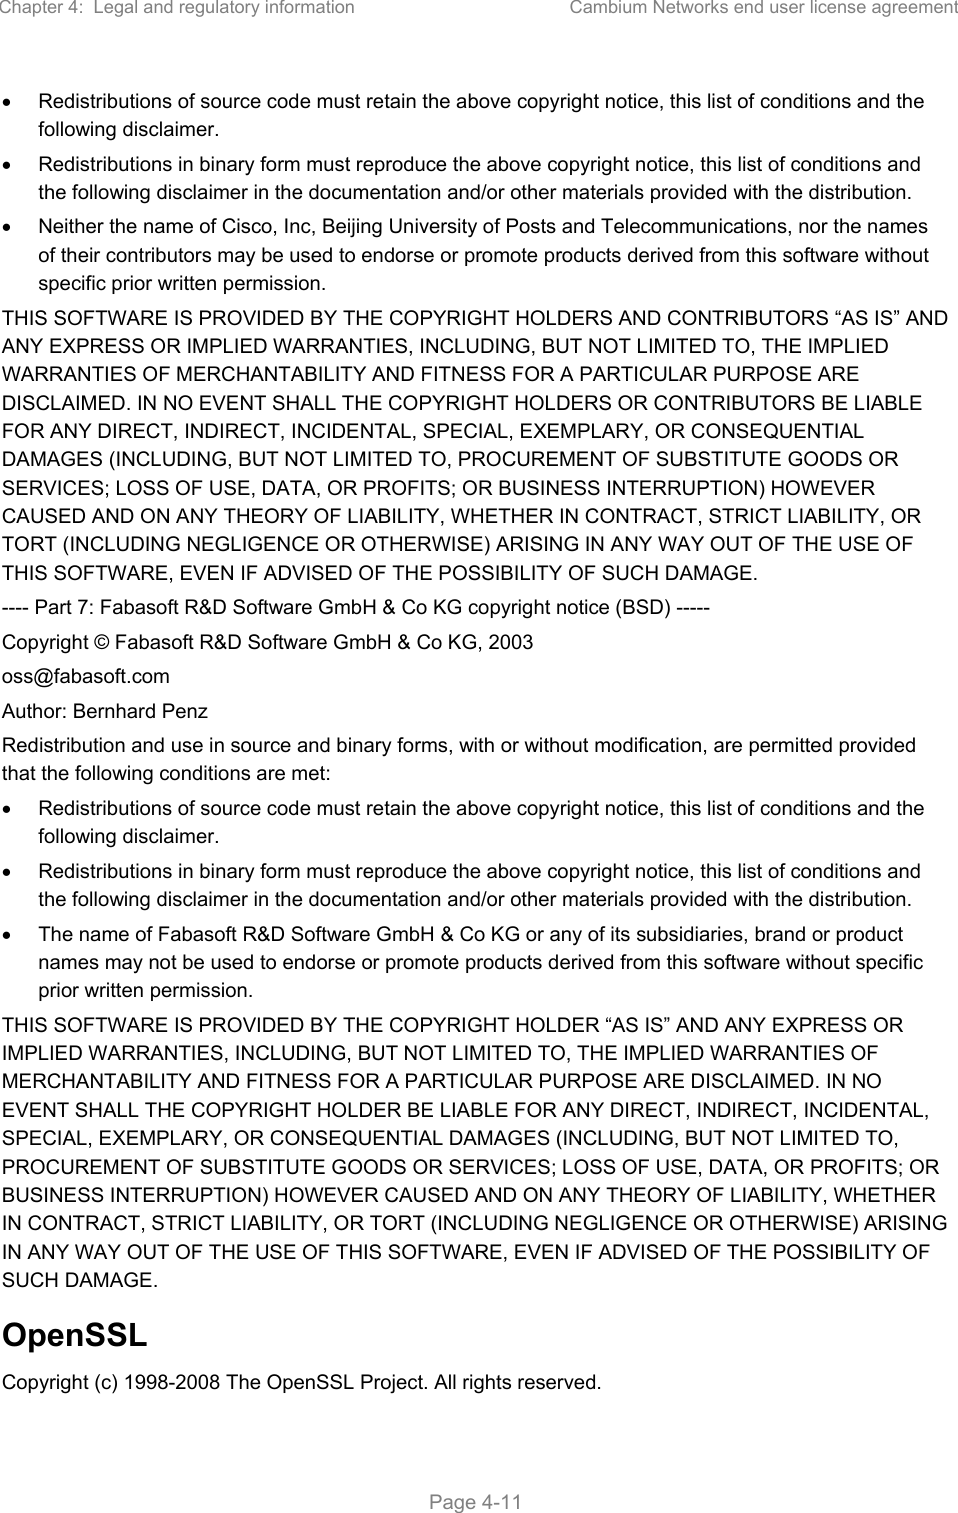 Chapter 4:  Legal and regulatory information  Cambium Networks end user license agreement   Page 4-11   Redistributions of source code must retain the above copyright notice, this list of conditions and the following disclaimer.   Redistributions in binary form must reproduce the above copyright notice, this list of conditions and the following disclaimer in the documentation and/or other materials provided with the distribution.   Neither the name of Cisco, Inc, Beijing University of Posts and Telecommunications, nor the names of their contributors may be used to endorse or promote products derived from this software without specific prior written permission. THIS SOFTWARE IS PROVIDED BY THE COPYRIGHT HOLDERS AND CONTRIBUTORS “AS IS” AND ANY EXPRESS OR IMPLIED WARRANTIES, INCLUDING, BUT NOT LIMITED TO, THE IMPLIED WARRANTIES OF MERCHANTABILITY AND FITNESS FOR A PARTICULAR PURPOSE ARE DISCLAIMED. IN NO EVENT SHALL THE COPYRIGHT HOLDERS OR CONTRIBUTORS BE LIABLE FOR ANY DIRECT, INDIRECT, INCIDENTAL, SPECIAL, EXEMPLARY, OR CONSEQUENTIAL DAMAGES (INCLUDING, BUT NOT LIMITED TO, PROCUREMENT OF SUBSTITUTE GOODS OR SERVICES; LOSS OF USE, DATA, OR PROFITS; OR BUSINESS INTERRUPTION) HOWEVER CAUSED AND ON ANY THEORY OF LIABILITY, WHETHER IN CONTRACT, STRICT LIABILITY, OR TORT (INCLUDING NEGLIGENCE OR OTHERWISE) ARISING IN ANY WAY OUT OF THE USE OF THIS SOFTWARE, EVEN IF ADVISED OF THE POSSIBILITY OF SUCH DAMAGE. ---- Part 7: Fabasoft R&amp;D Software GmbH &amp; Co KG copyright notice (BSD) ----- Copyright © Fabasoft R&amp;D Software GmbH &amp; Co KG, 2003 oss@fabasoft.com Author: Bernhard Penz Redistribution and use in source and binary forms, with or without modification, are permitted provided that the following conditions are met:   Redistributions of source code must retain the above copyright notice, this list of conditions and the following disclaimer.   Redistributions in binary form must reproduce the above copyright notice, this list of conditions and the following disclaimer in the documentation and/or other materials provided with the distribution.   The name of Fabasoft R&amp;D Software GmbH &amp; Co KG or any of its subsidiaries, brand or product names may not be used to endorse or promote products derived from this software without specific prior written permission. THIS SOFTWARE IS PROVIDED BY THE COPYRIGHT HOLDER “AS IS” AND ANY EXPRESS OR IMPLIED WARRANTIES, INCLUDING, BUT NOT LIMITED TO, THE IMPLIED WARRANTIES OF MERCHANTABILITY AND FITNESS FOR A PARTICULAR PURPOSE ARE DISCLAIMED. IN NO EVENT SHALL THE COPYRIGHT HOLDER BE LIABLE FOR ANY DIRECT, INDIRECT, INCIDENTAL, SPECIAL, EXEMPLARY, OR CONSEQUENTIAL DAMAGES (INCLUDING, BUT NOT LIMITED TO, PROCUREMENT OF SUBSTITUTE GOODS OR SERVICES; LOSS OF USE, DATA, OR PROFITS; OR BUSINESS INTERRUPTION) HOWEVER CAUSED AND ON ANY THEORY OF LIABILITY, WHETHER IN CONTRACT, STRICT LIABILITY, OR TORT (INCLUDING NEGLIGENCE OR OTHERWISE) ARISING IN ANY WAY OUT OF THE USE OF THIS SOFTWARE, EVEN IF ADVISED OF THE POSSIBILITY OF SUCH DAMAGE. OpenSSL Copyright (c) 1998-2008 The OpenSSL Project. All rights reserved. 